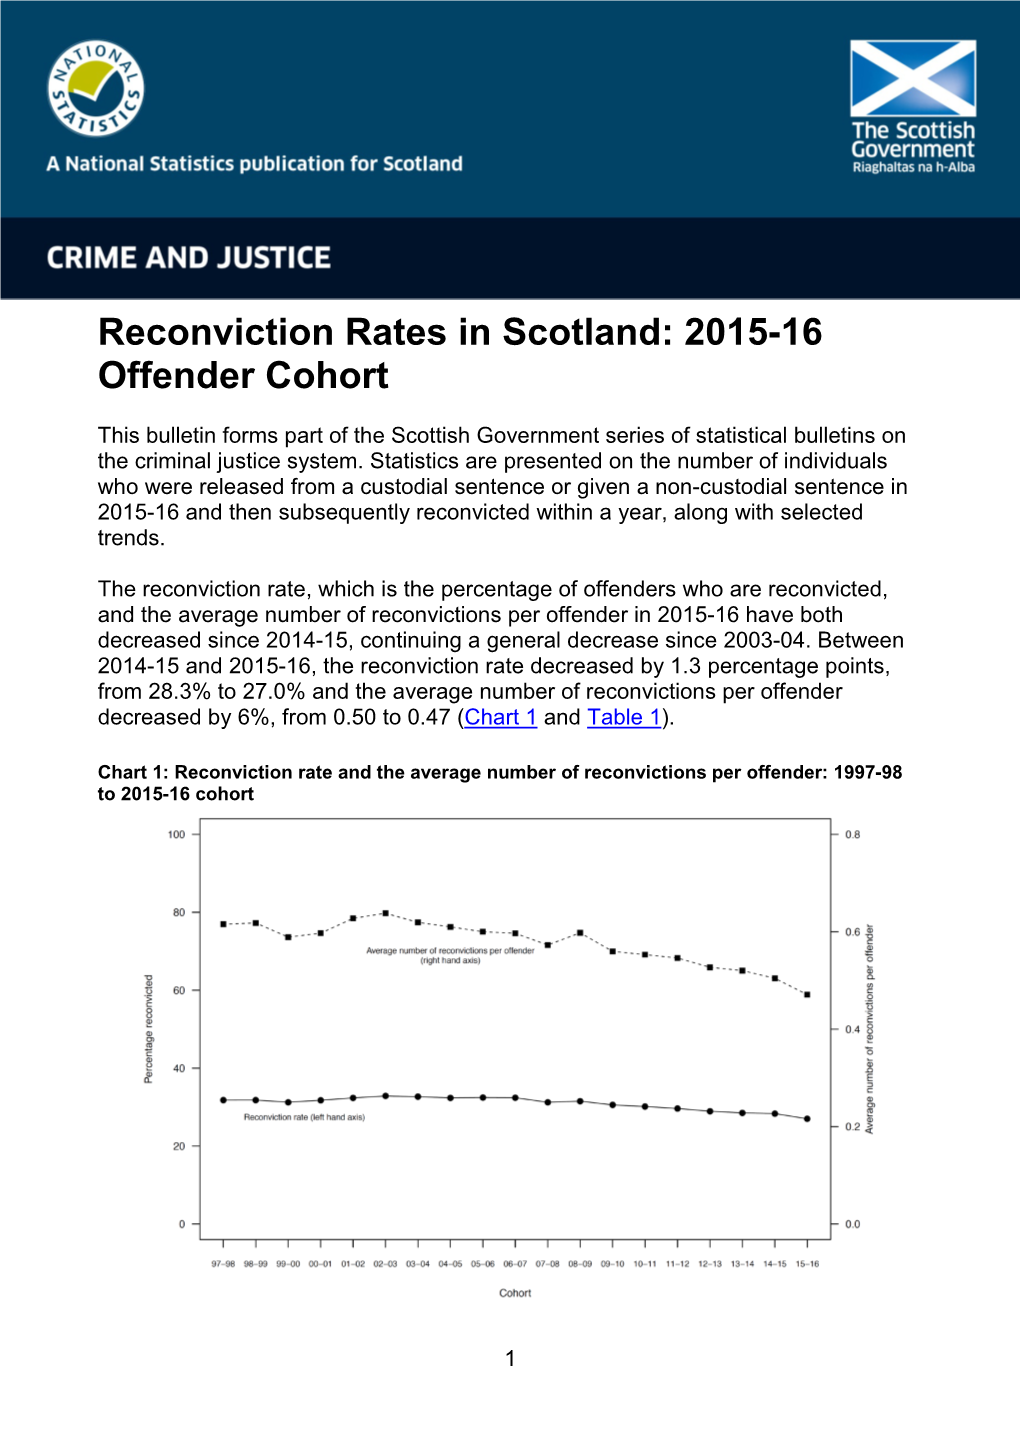 Reconviction Rates in Scotland: 2015-16 Offender Cohort